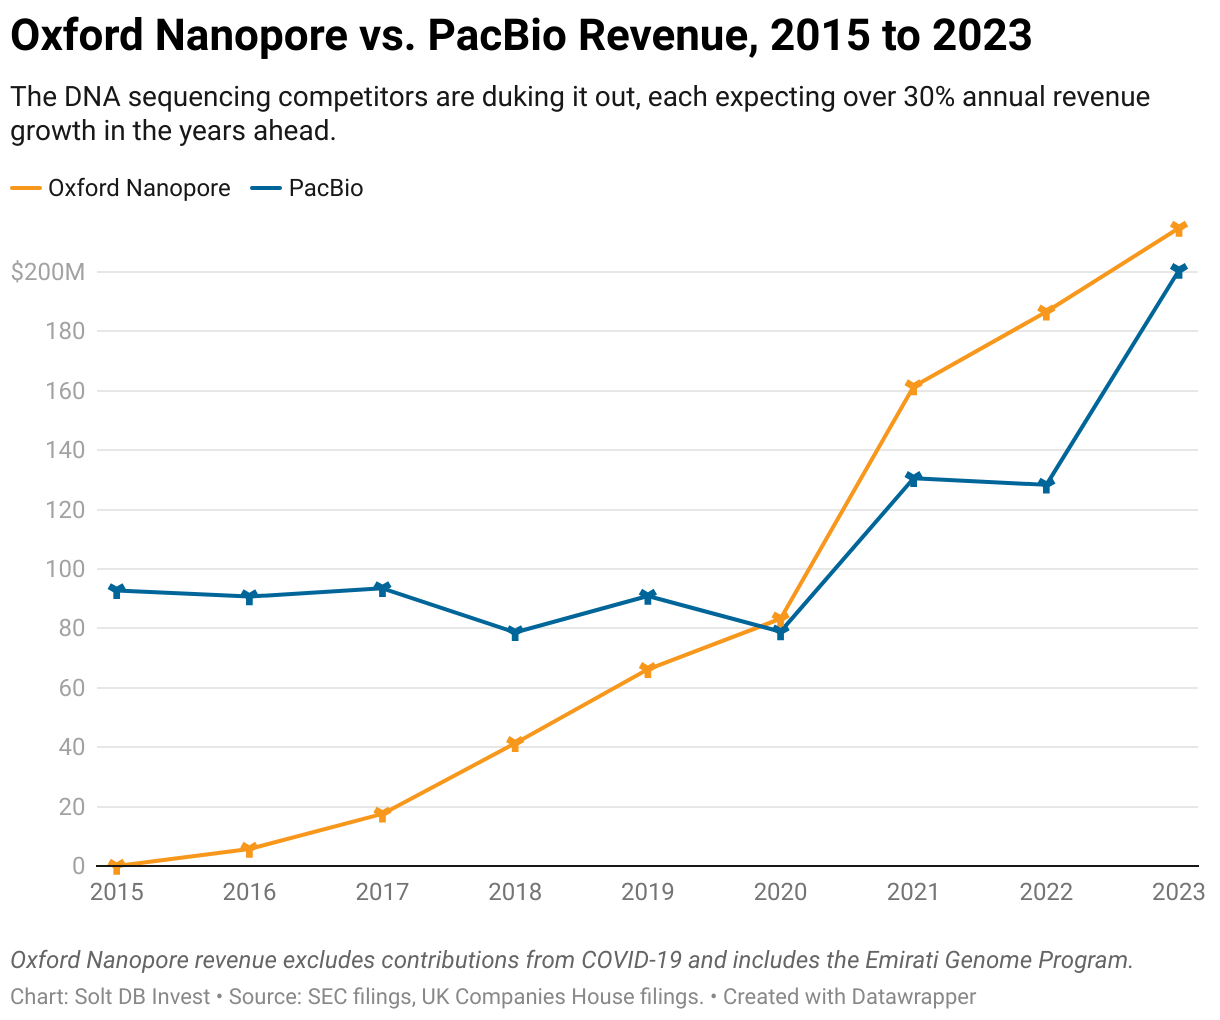 A graph showing annual revenue from Oxford Nanopore and PacBio from 2015 through preliminary 2023 totals.